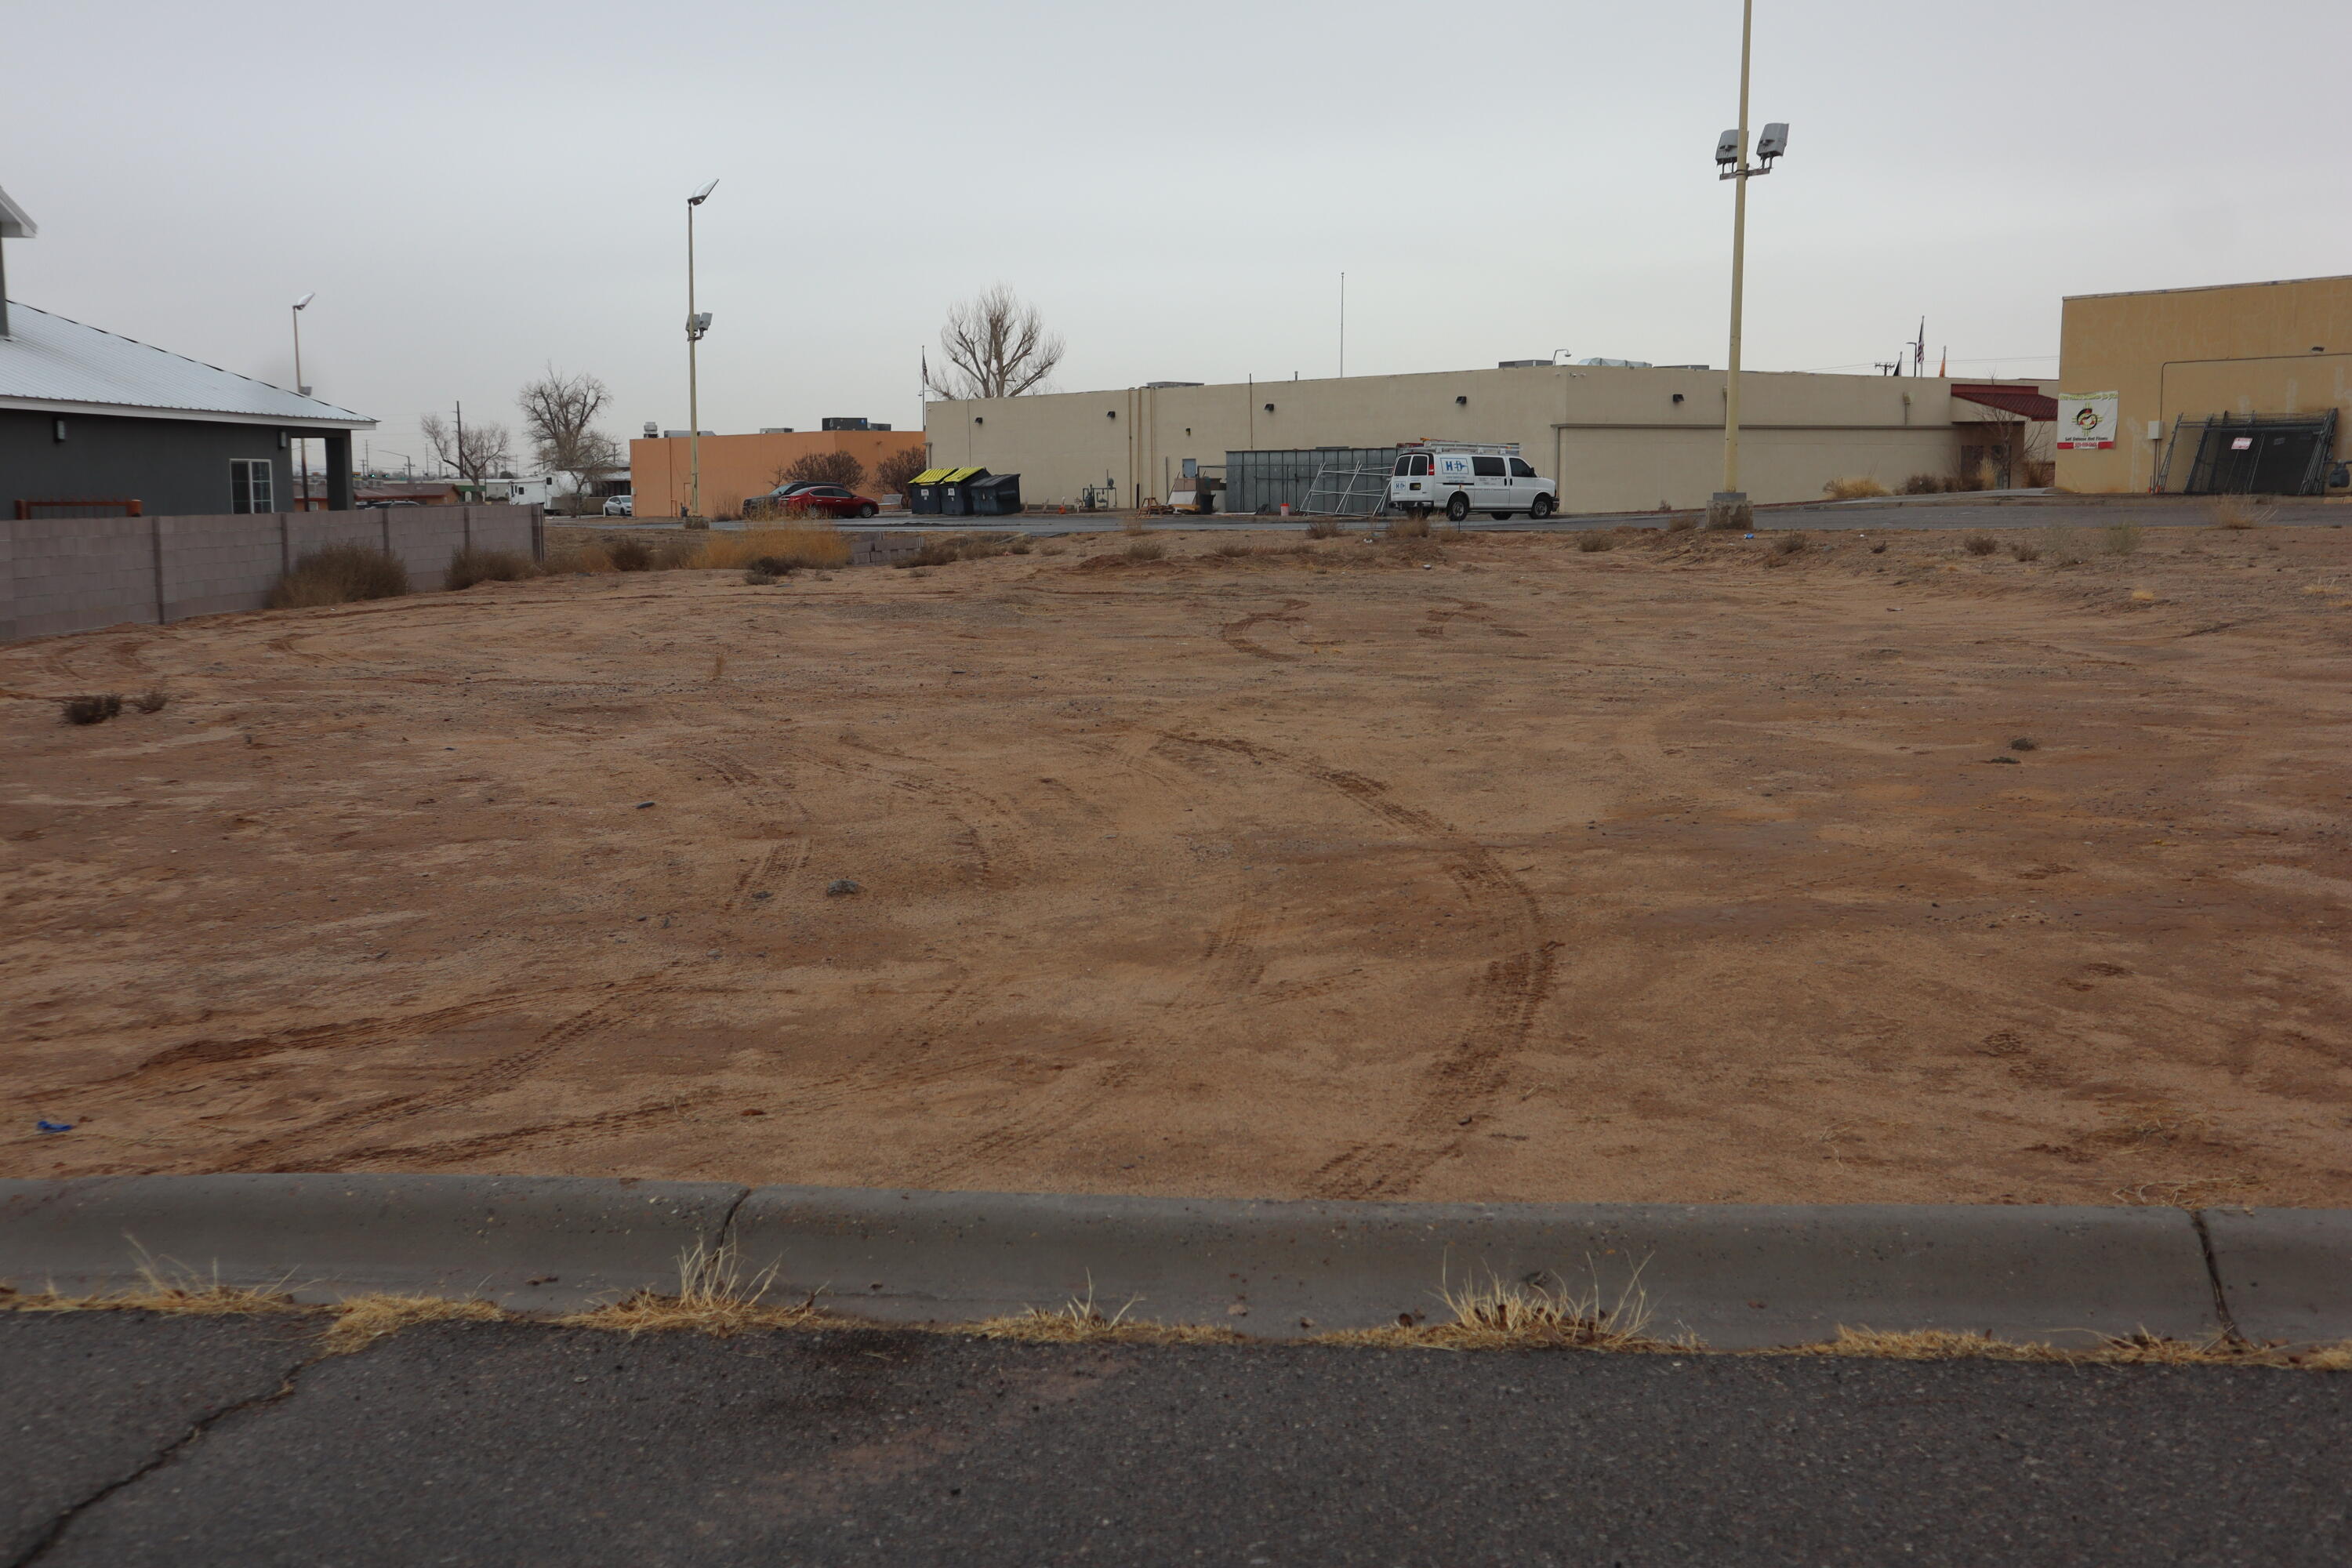 Lot 17-A, Rio Communities, New Mexico 87002, ,Land,For Sale, Lot 17-A,1054582